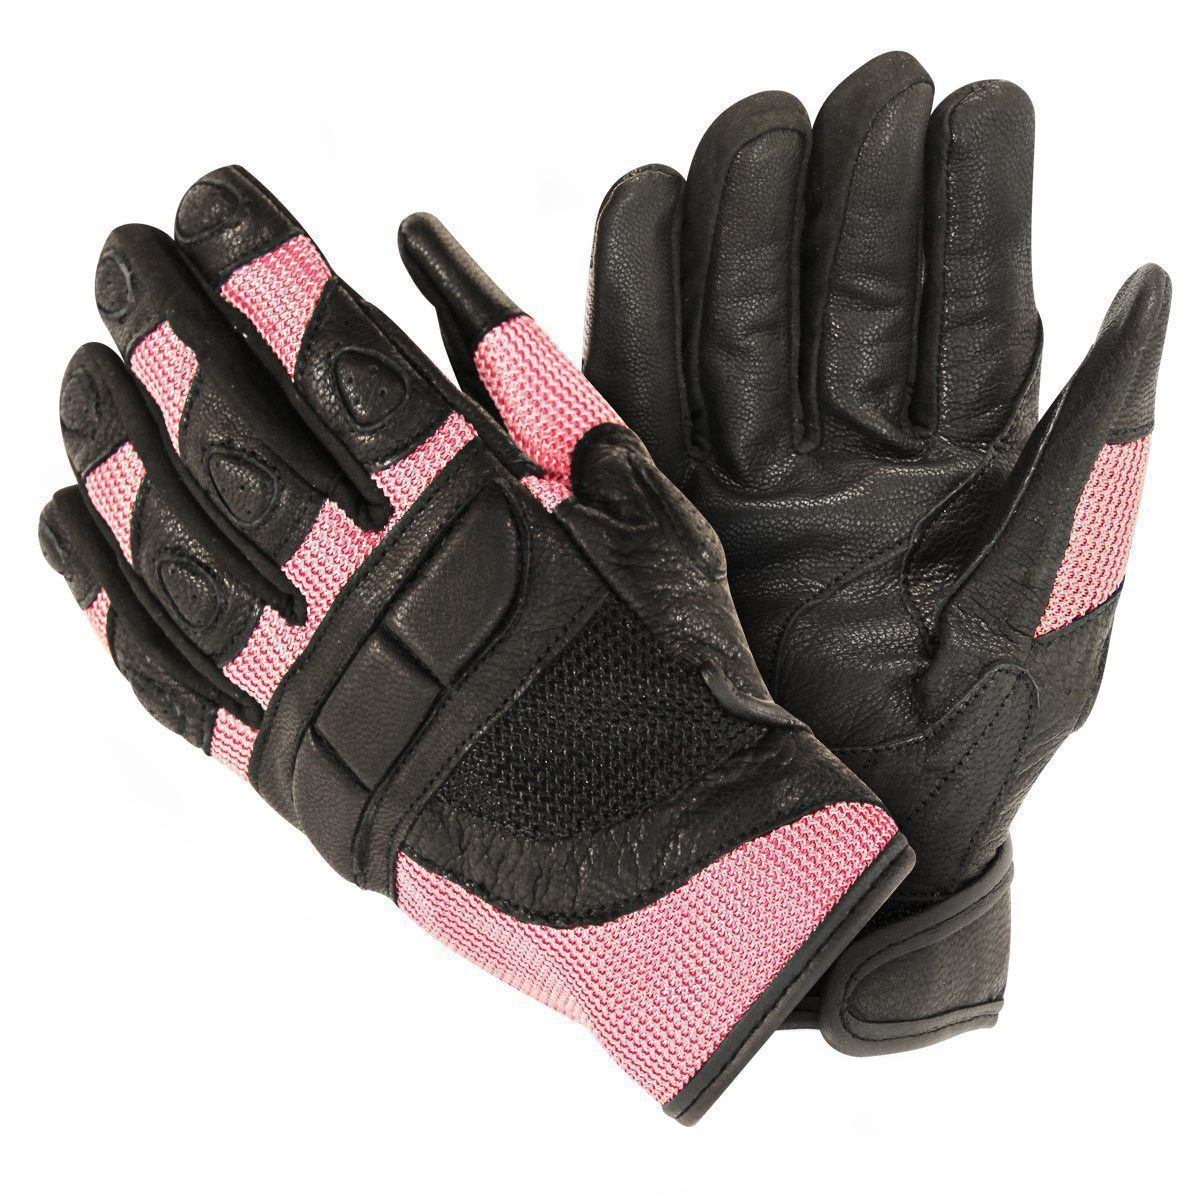 Xelement XG80206 Women's Black and Pink Mesh Cool Rider Motorcycle Gloves